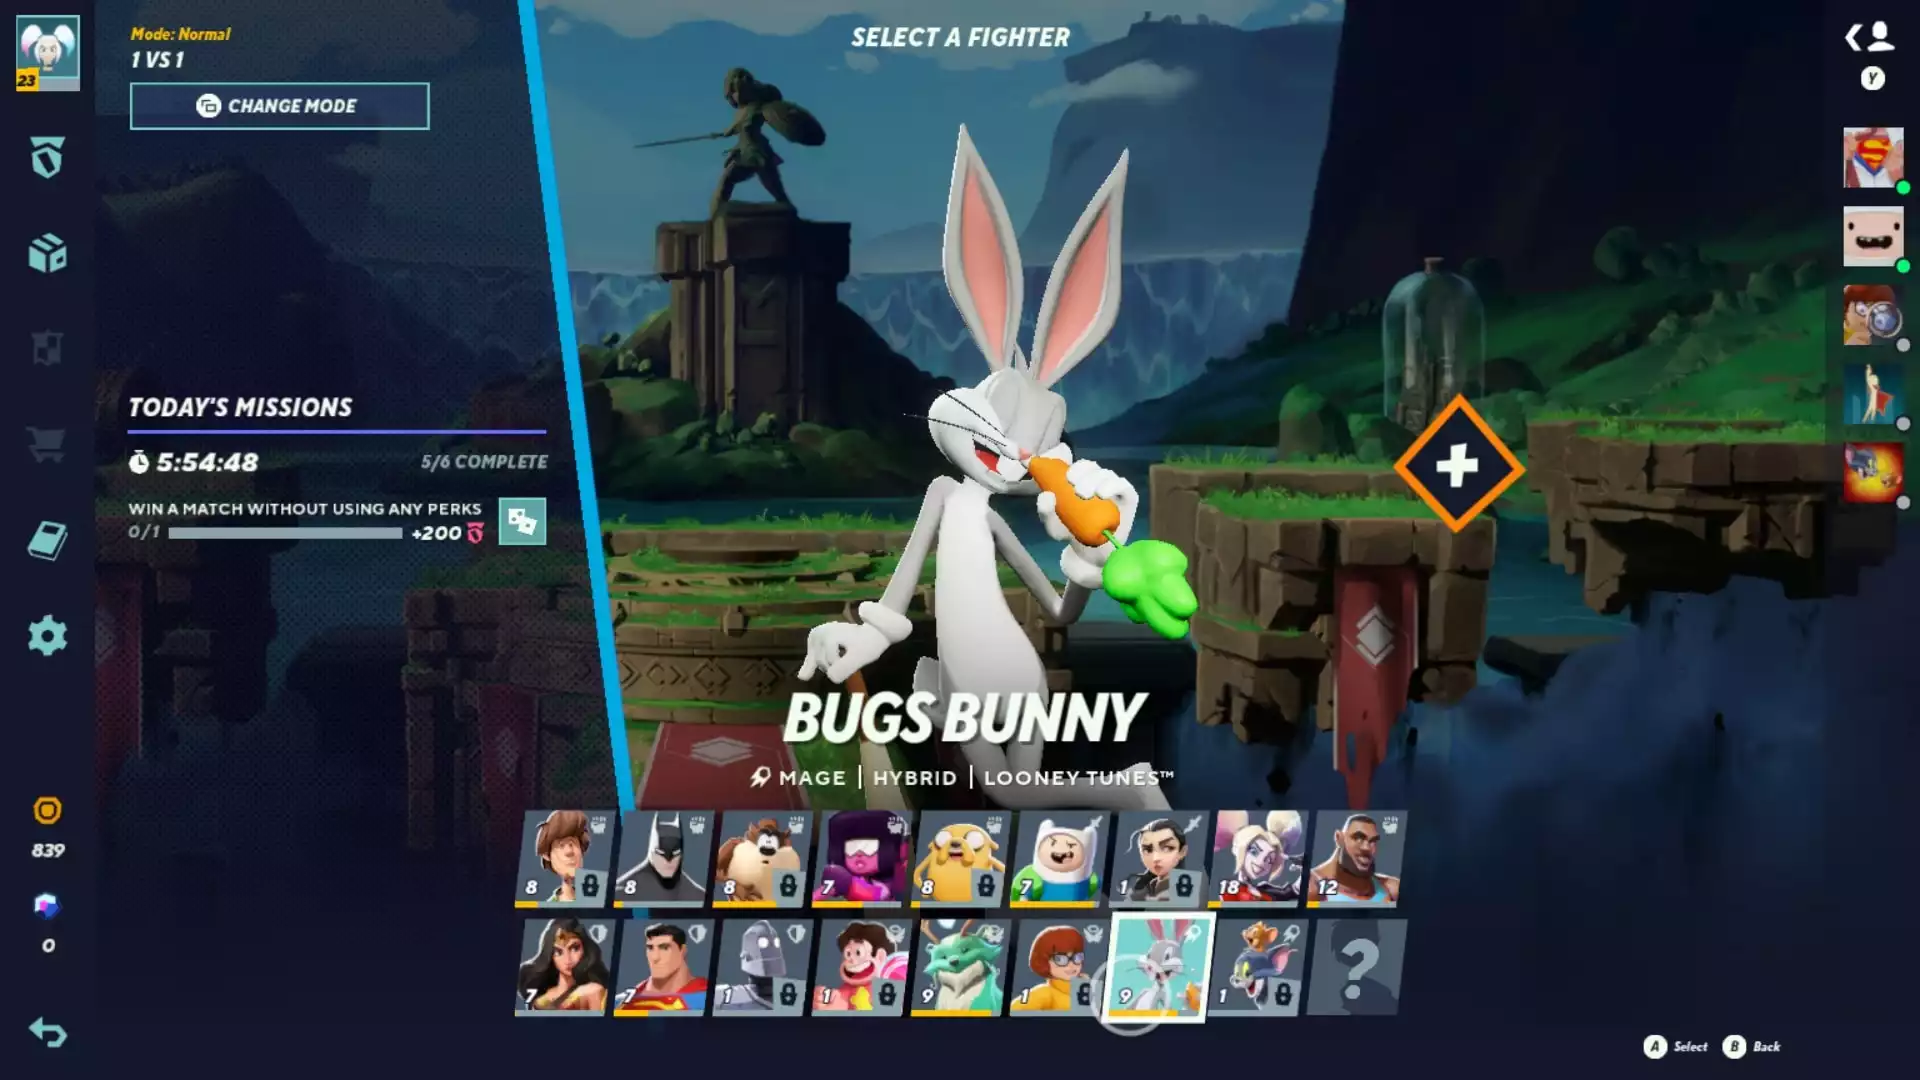 MultiVersus Bugs Bunny combos, perks and specials